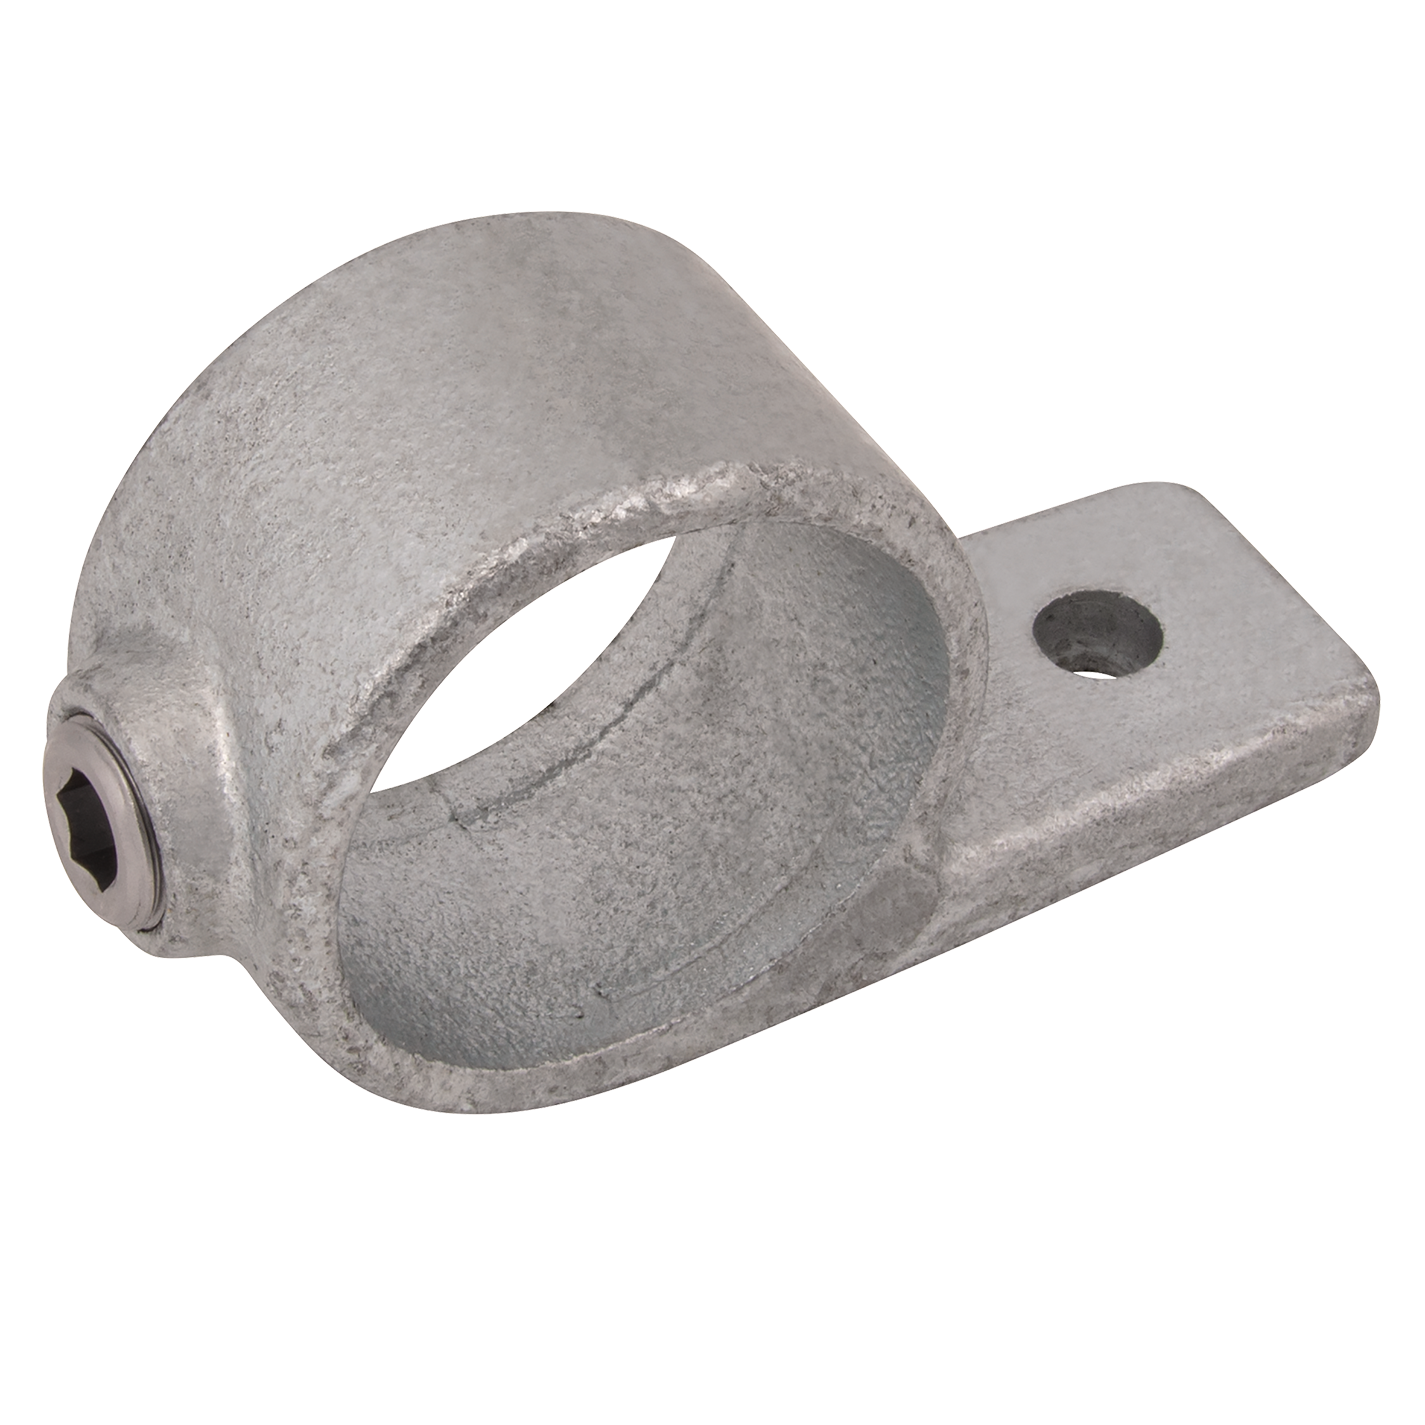 SINGLE PIPE CLAMP (199) SIZE 2